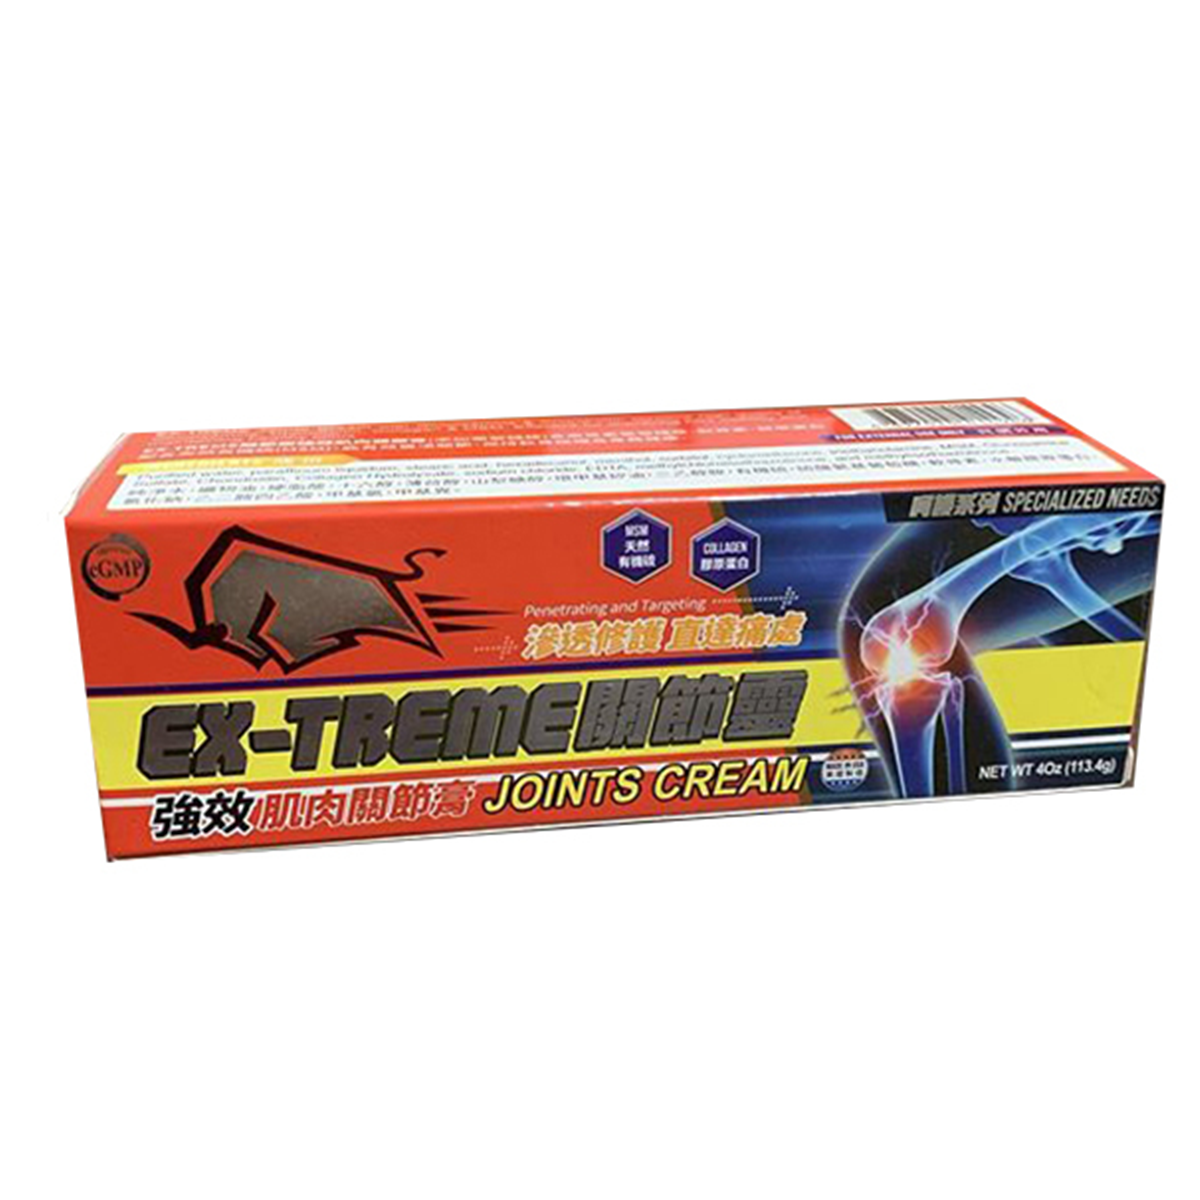 EX-TREME Joint Spirit- Strong Muscle Joint Ointment (113g) Produced by GMP pharmaceutical factory in the United States